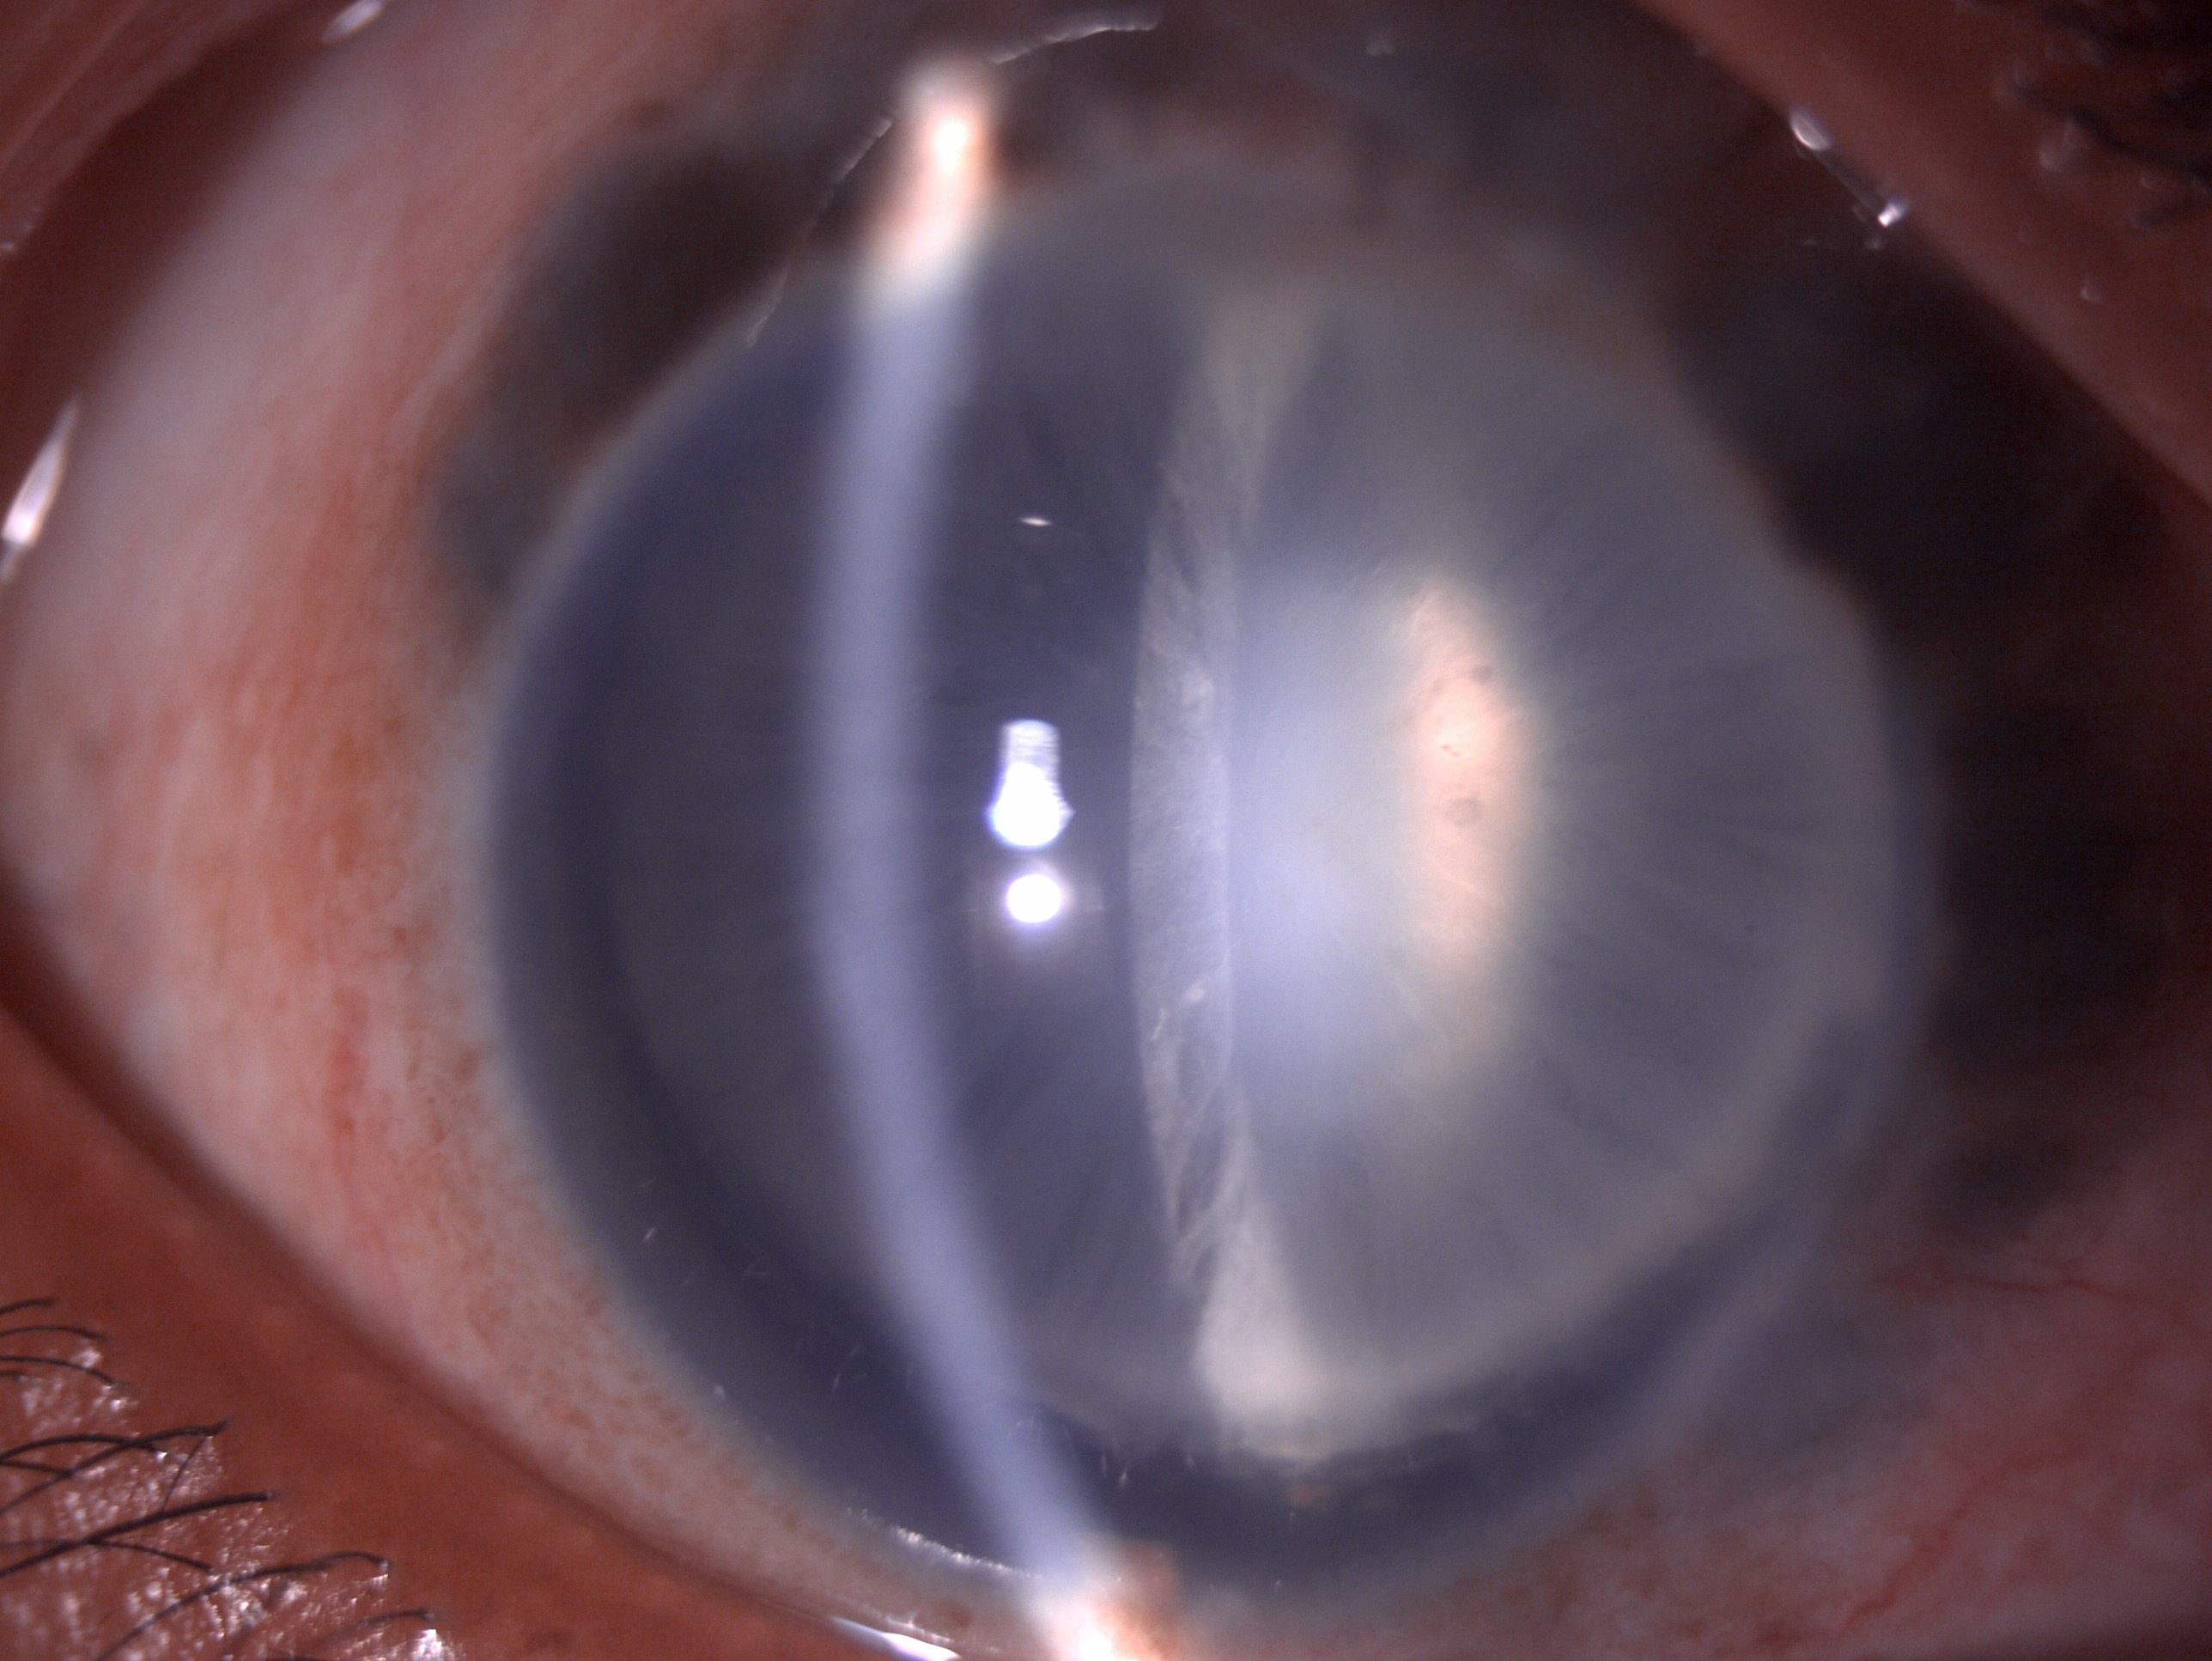 Digital image of the patient depicting mild congestion, scleral thinning, uveal show, deep anterior chamber, zonular dialysis and subluxated cataract who has been planned for MIGS